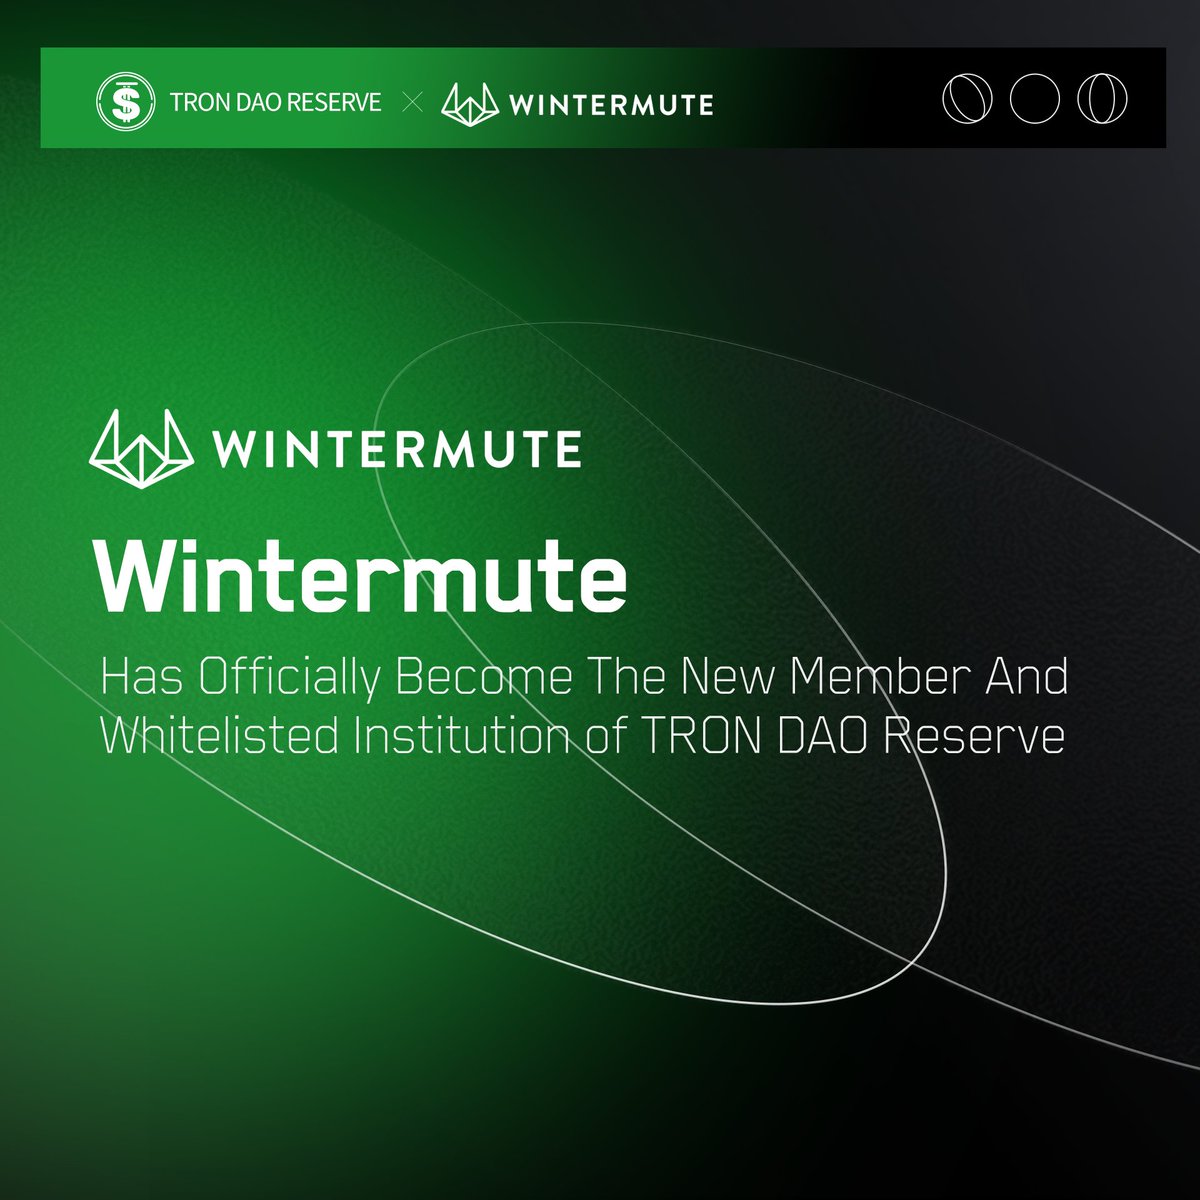 Tron DAO Reserve gives Wintermute the right to mint and burn USDD